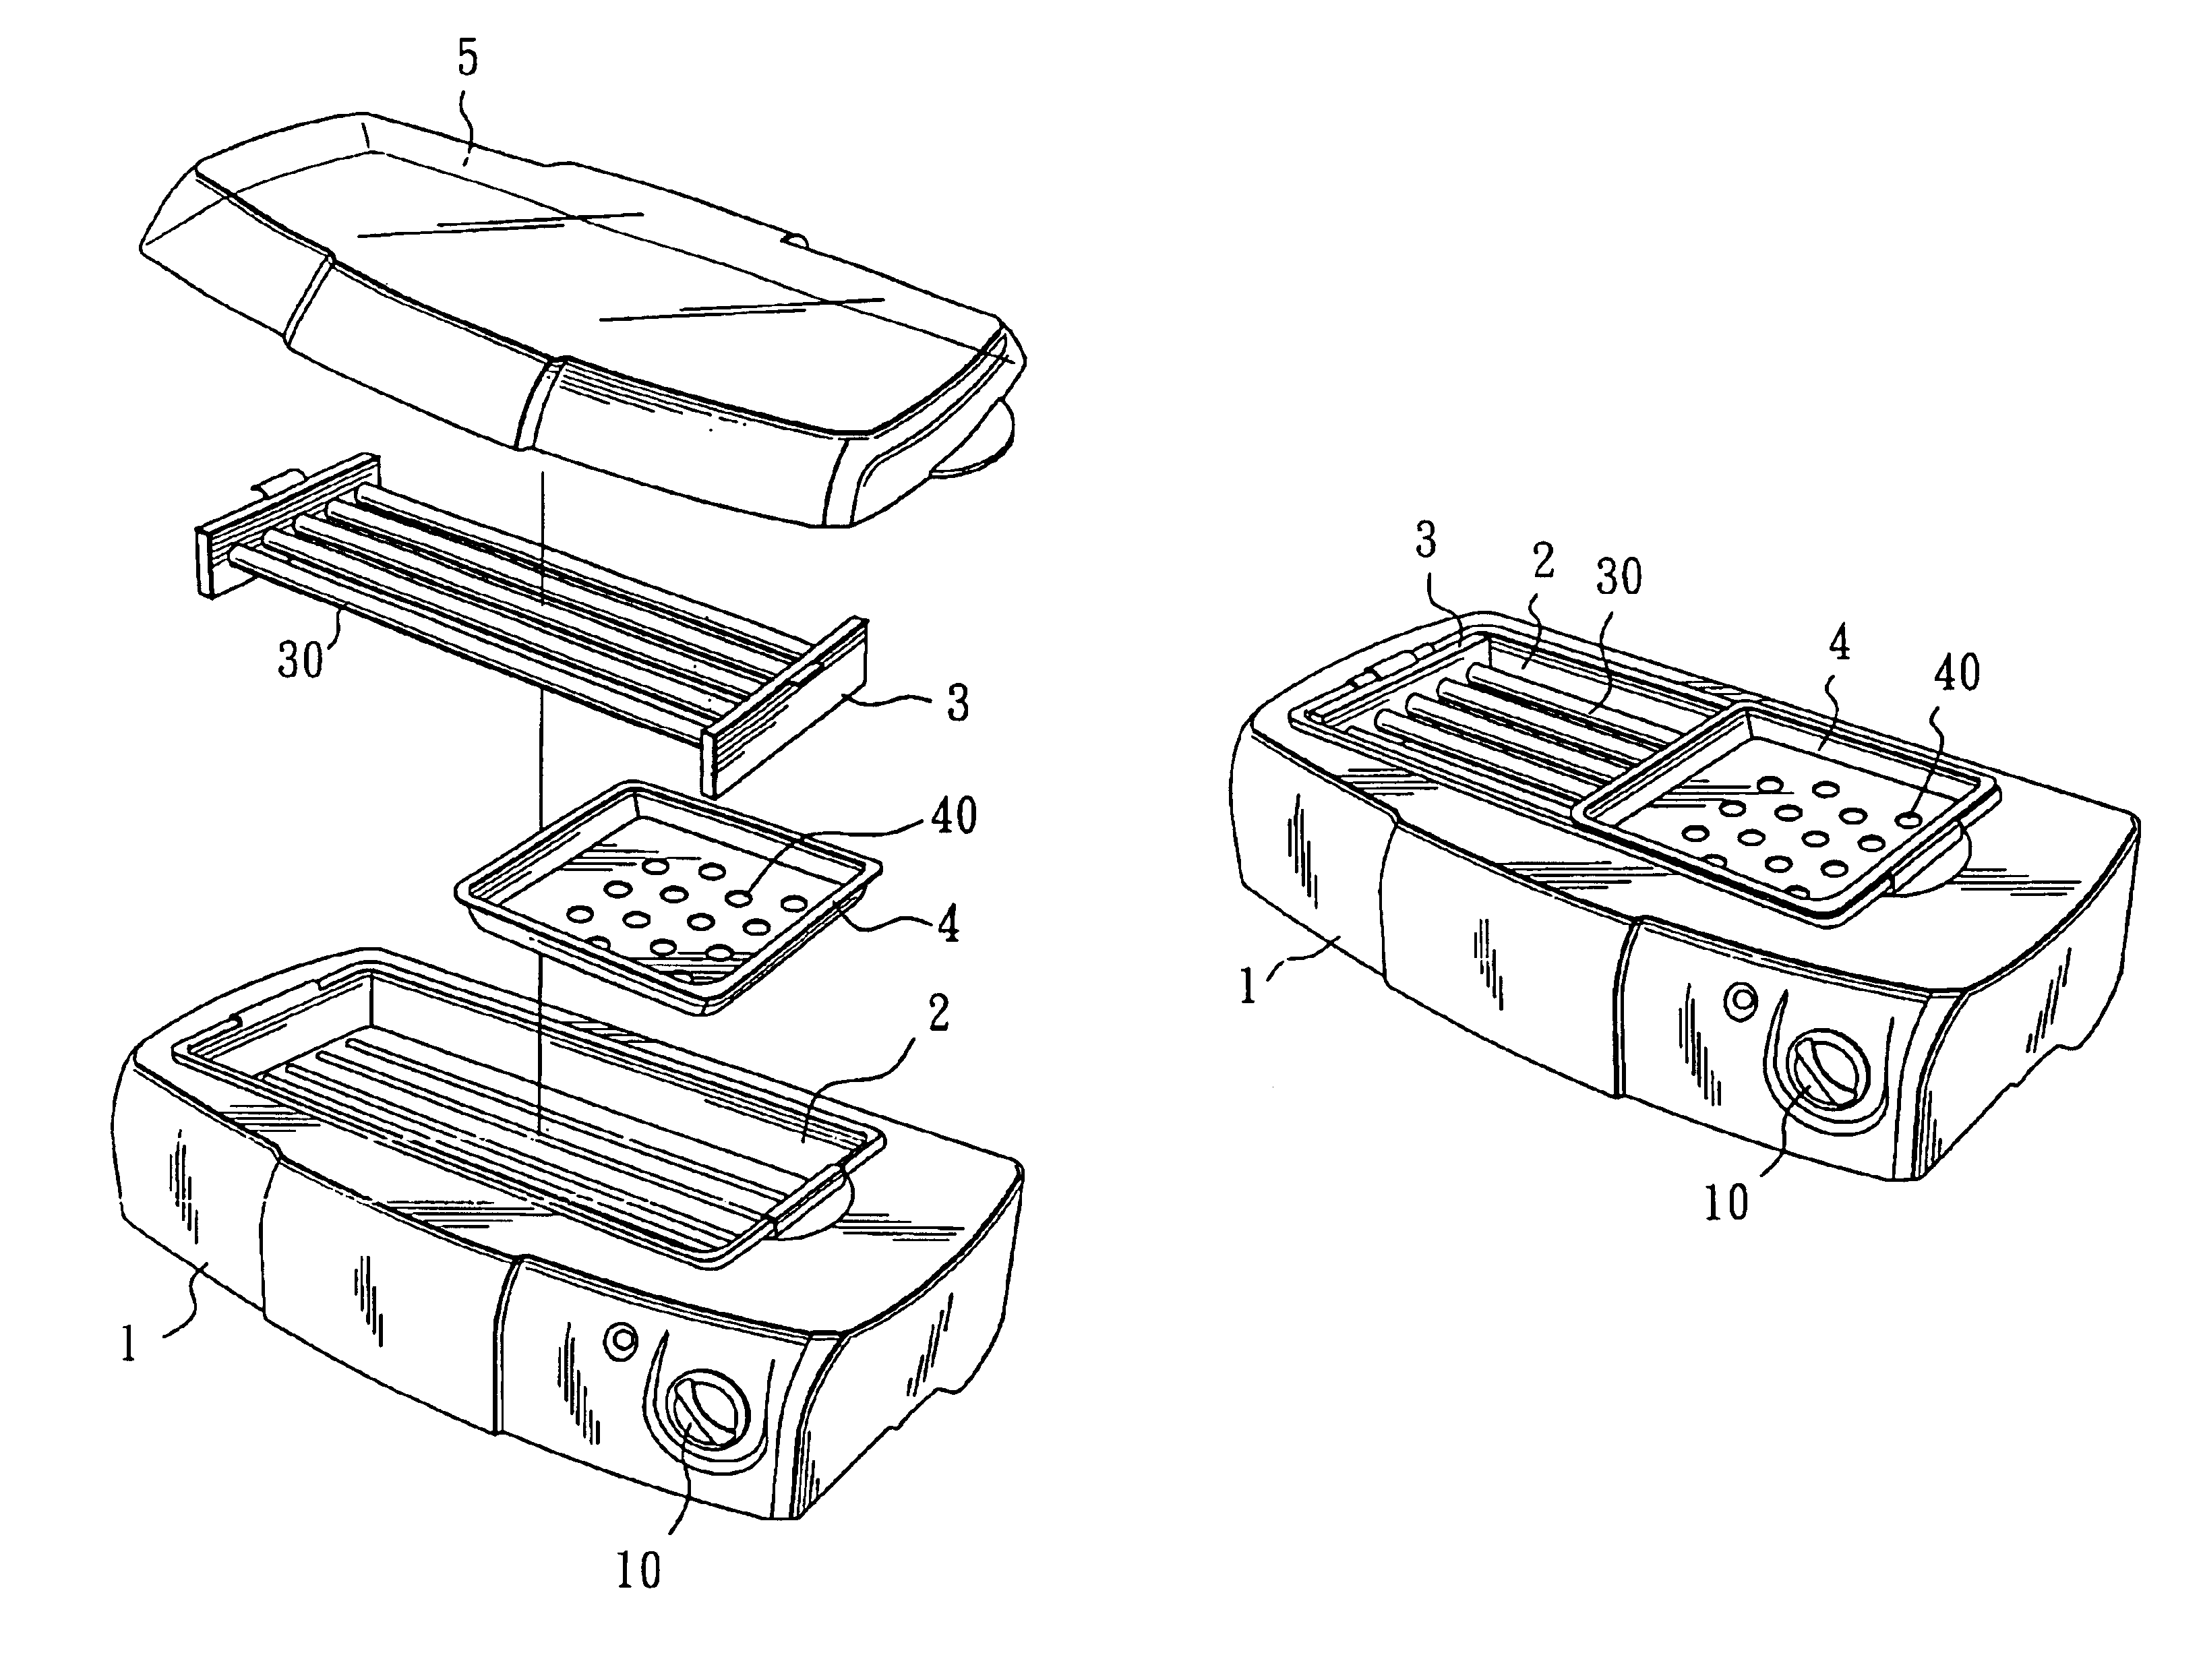 Household sectional oven and warmer cooking apparatus